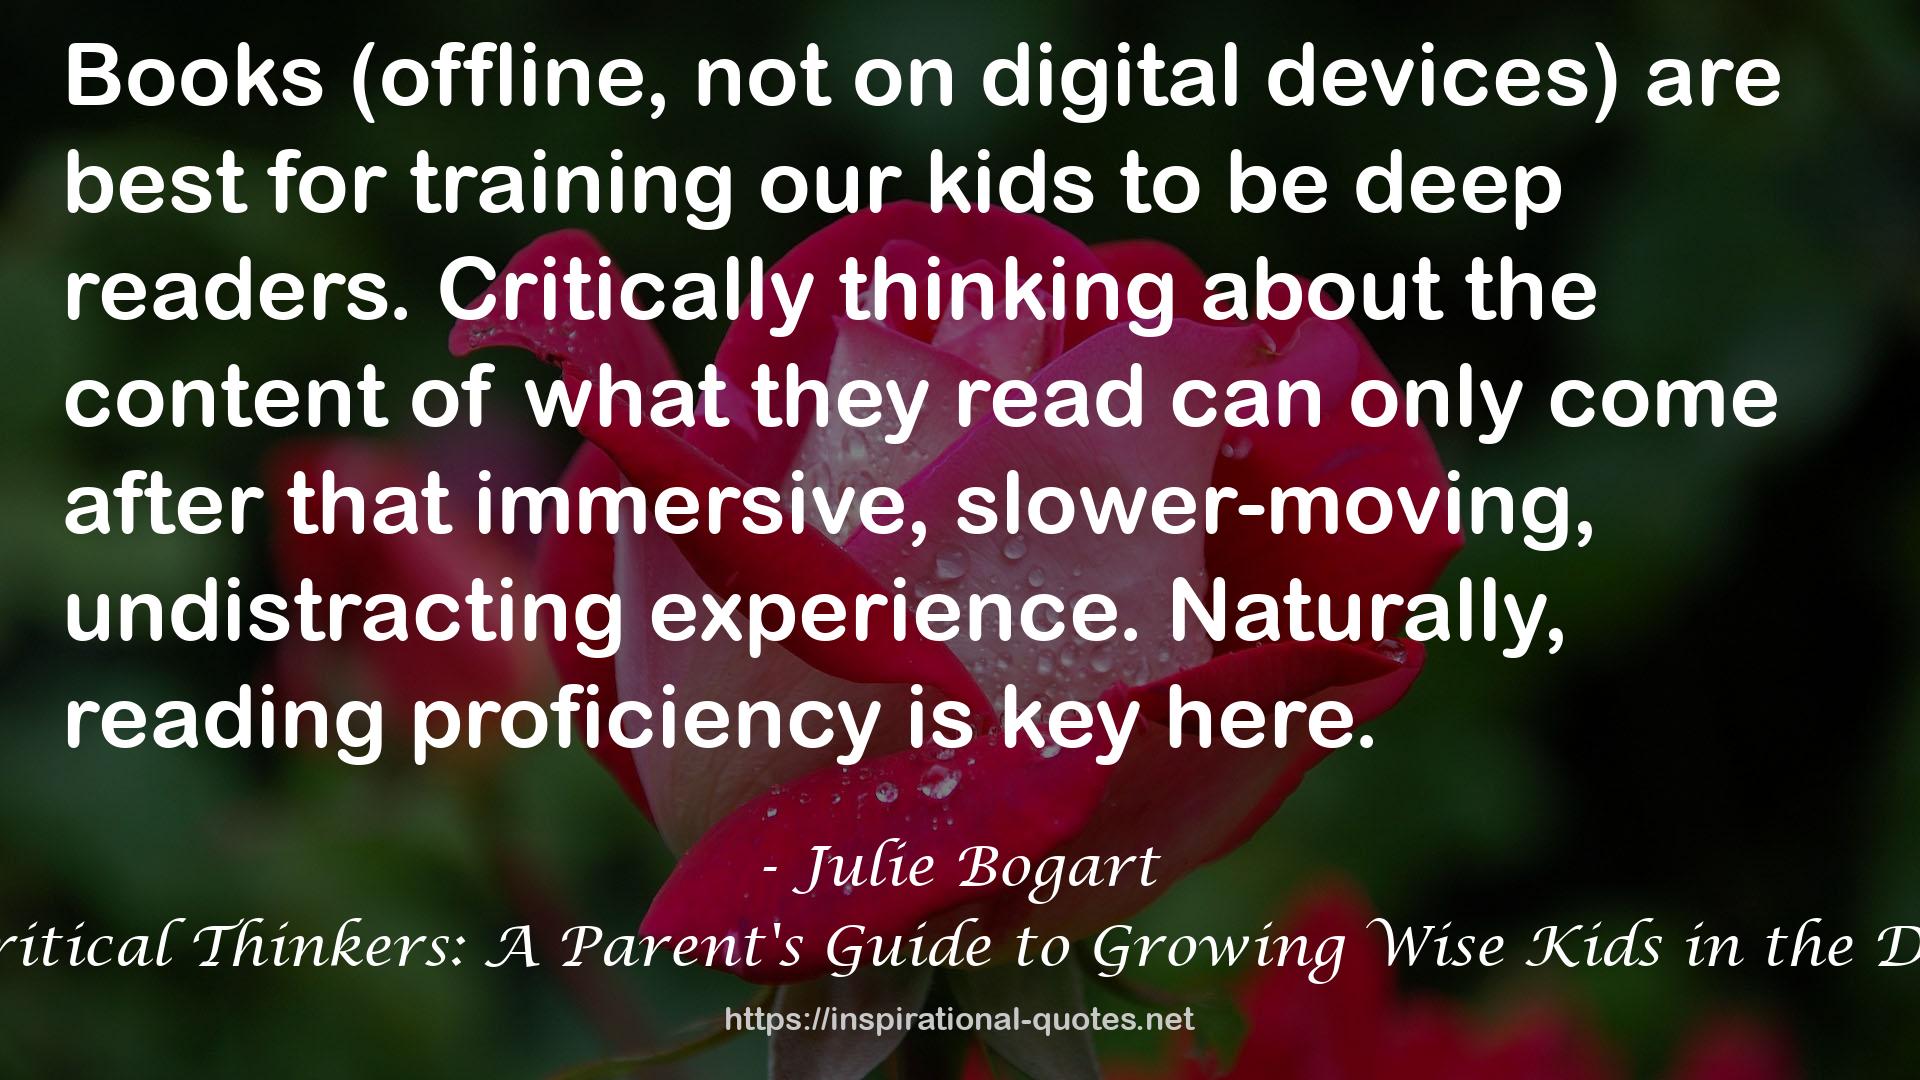 Raising Critical Thinkers: A Parent's Guide to Growing Wise Kids in the Digital Age QUOTES